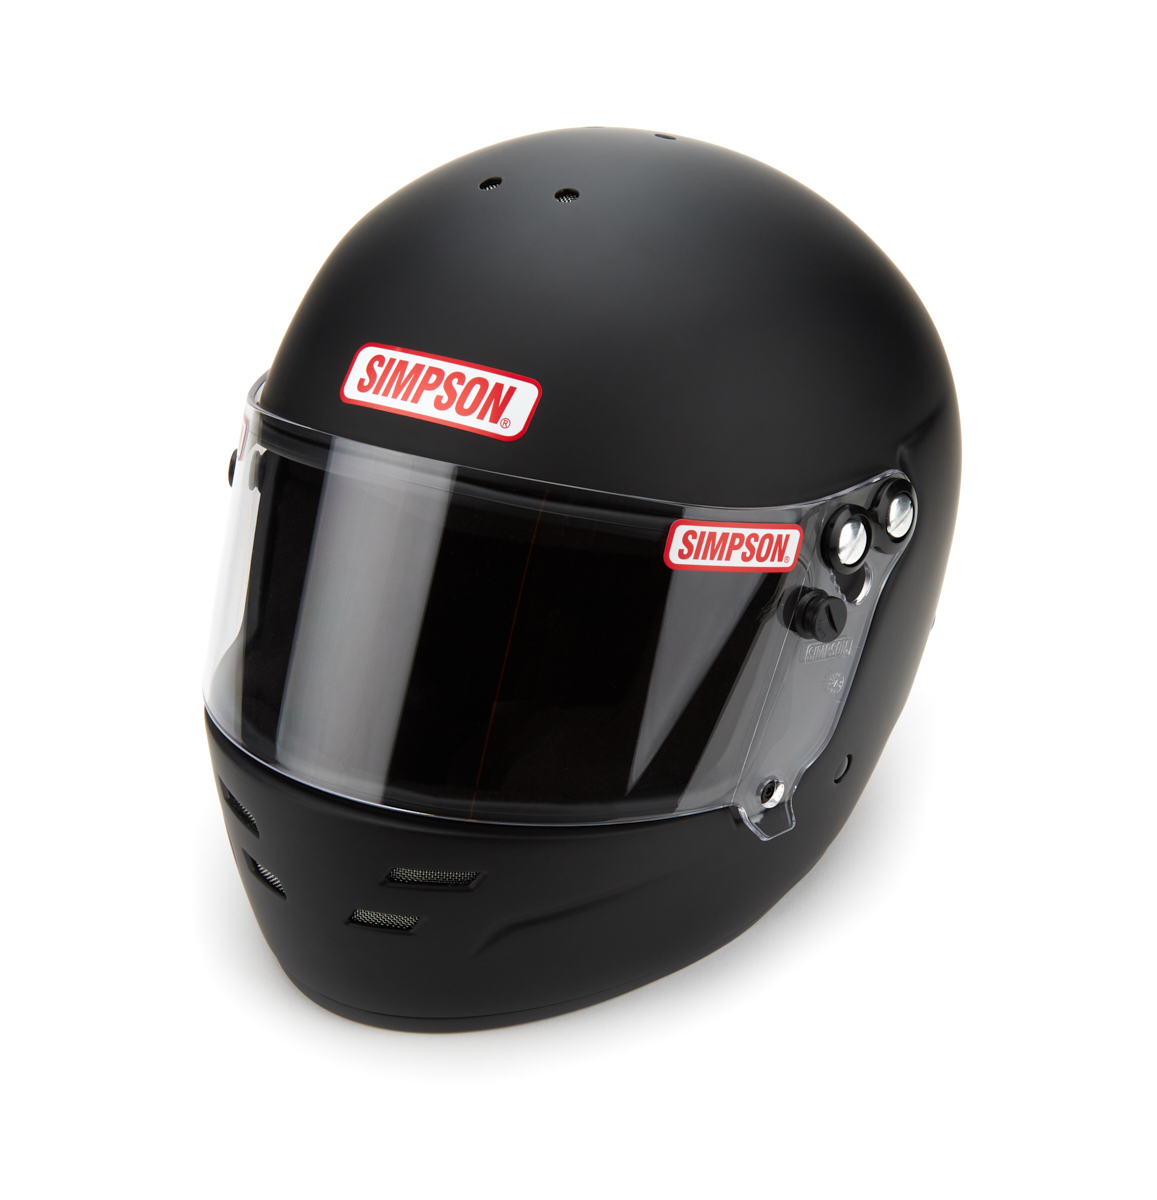 Helmet - Viper - Full Face - Snell SA2020 - Head and Neck Support Ready - Flat Black - Large - Each